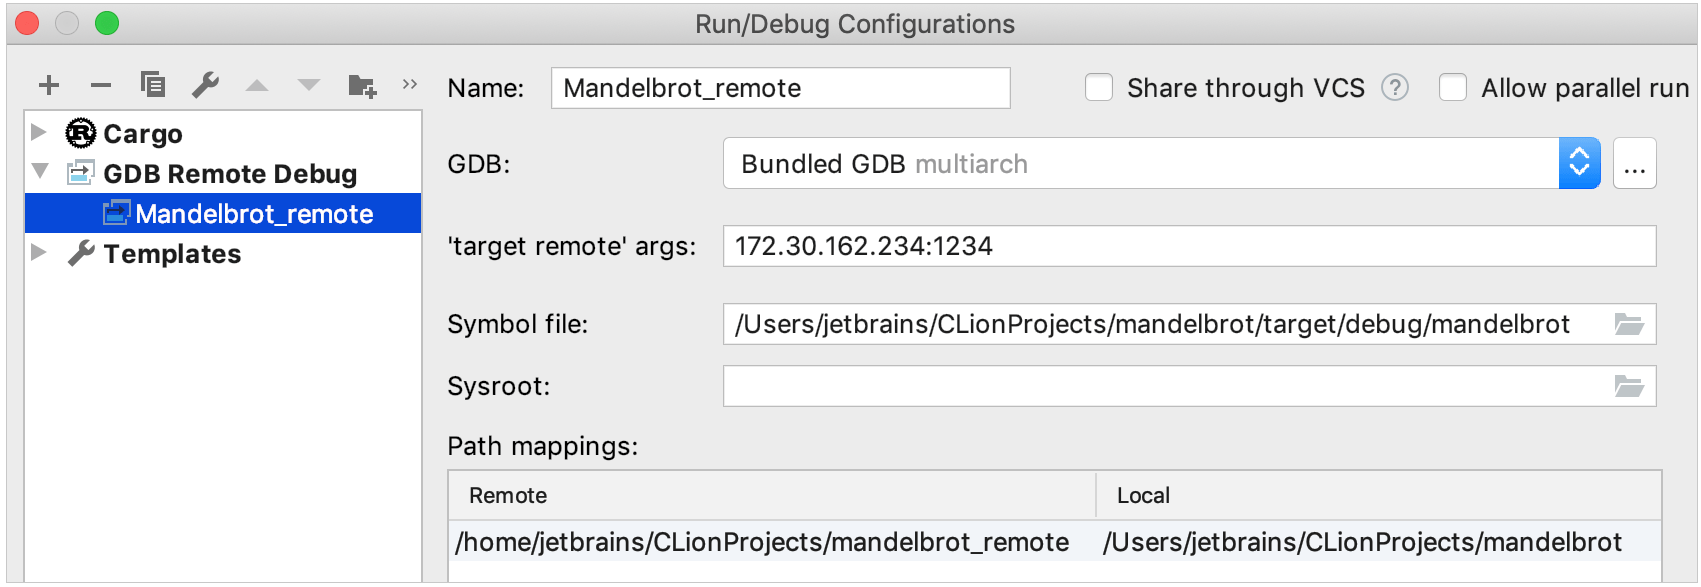 GDB remote debug configuration for a Rust project